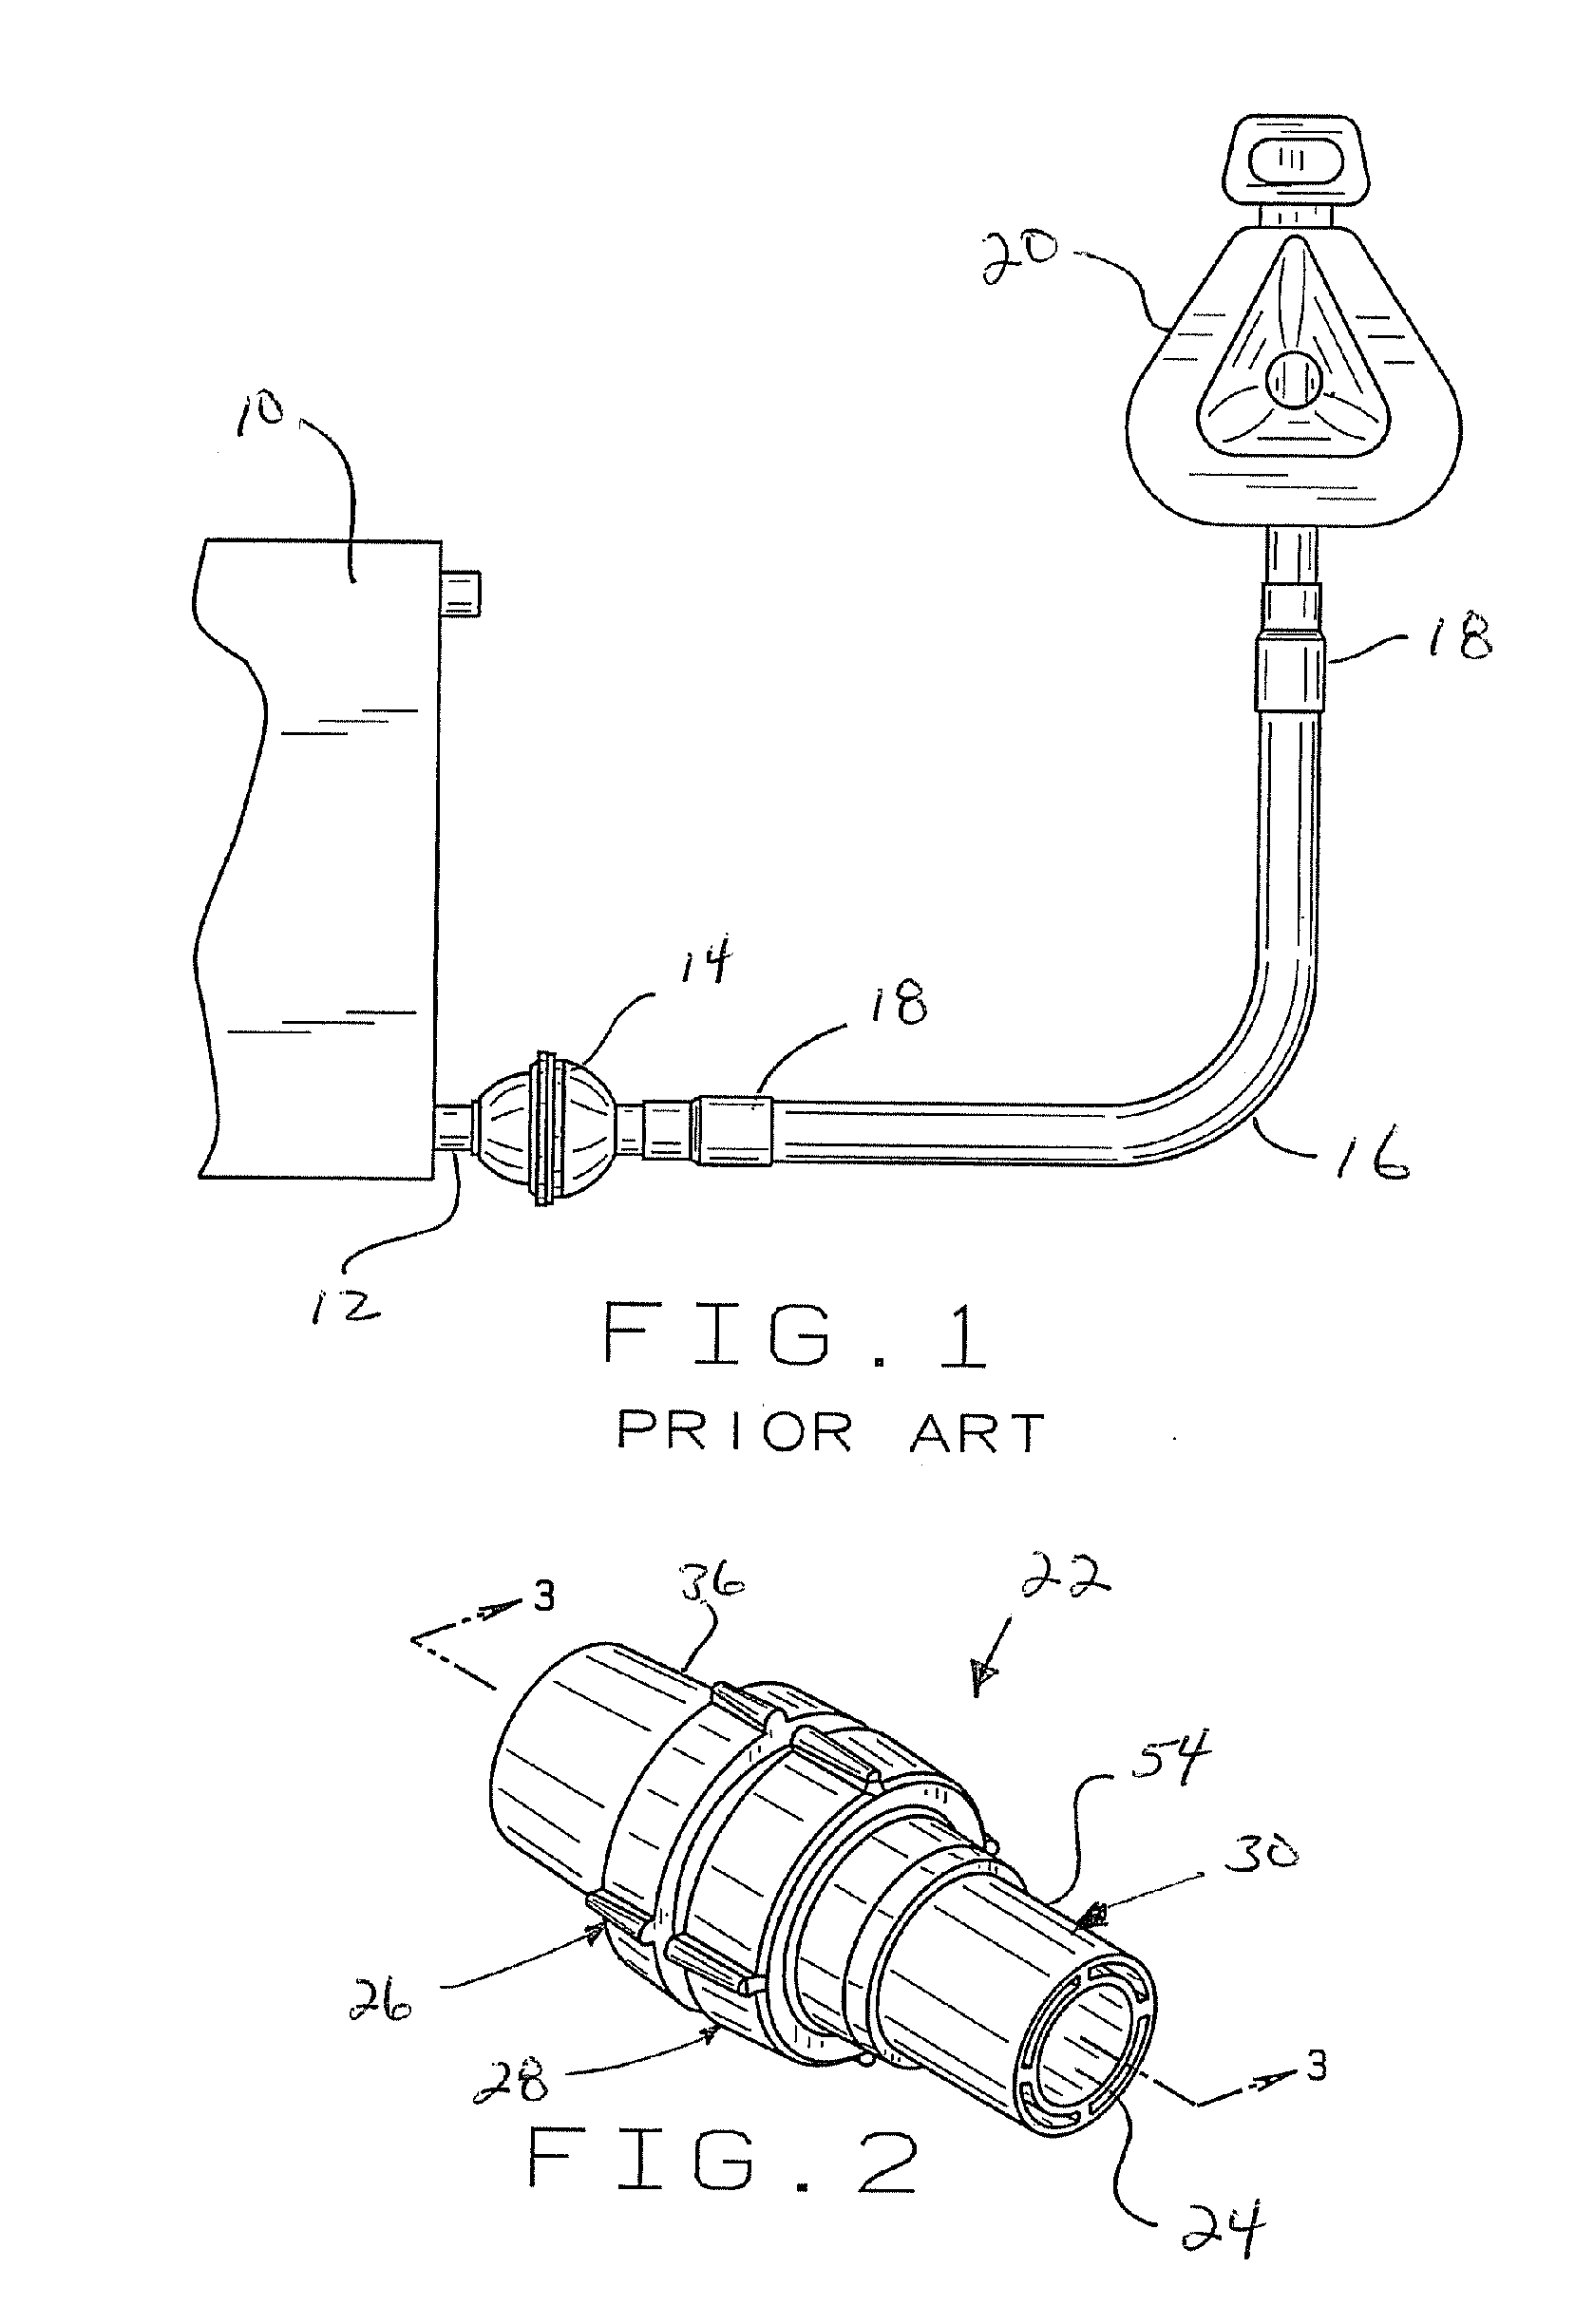 Swivel filter for use with sleep apnea and other respiratory equipment including associated interface systems